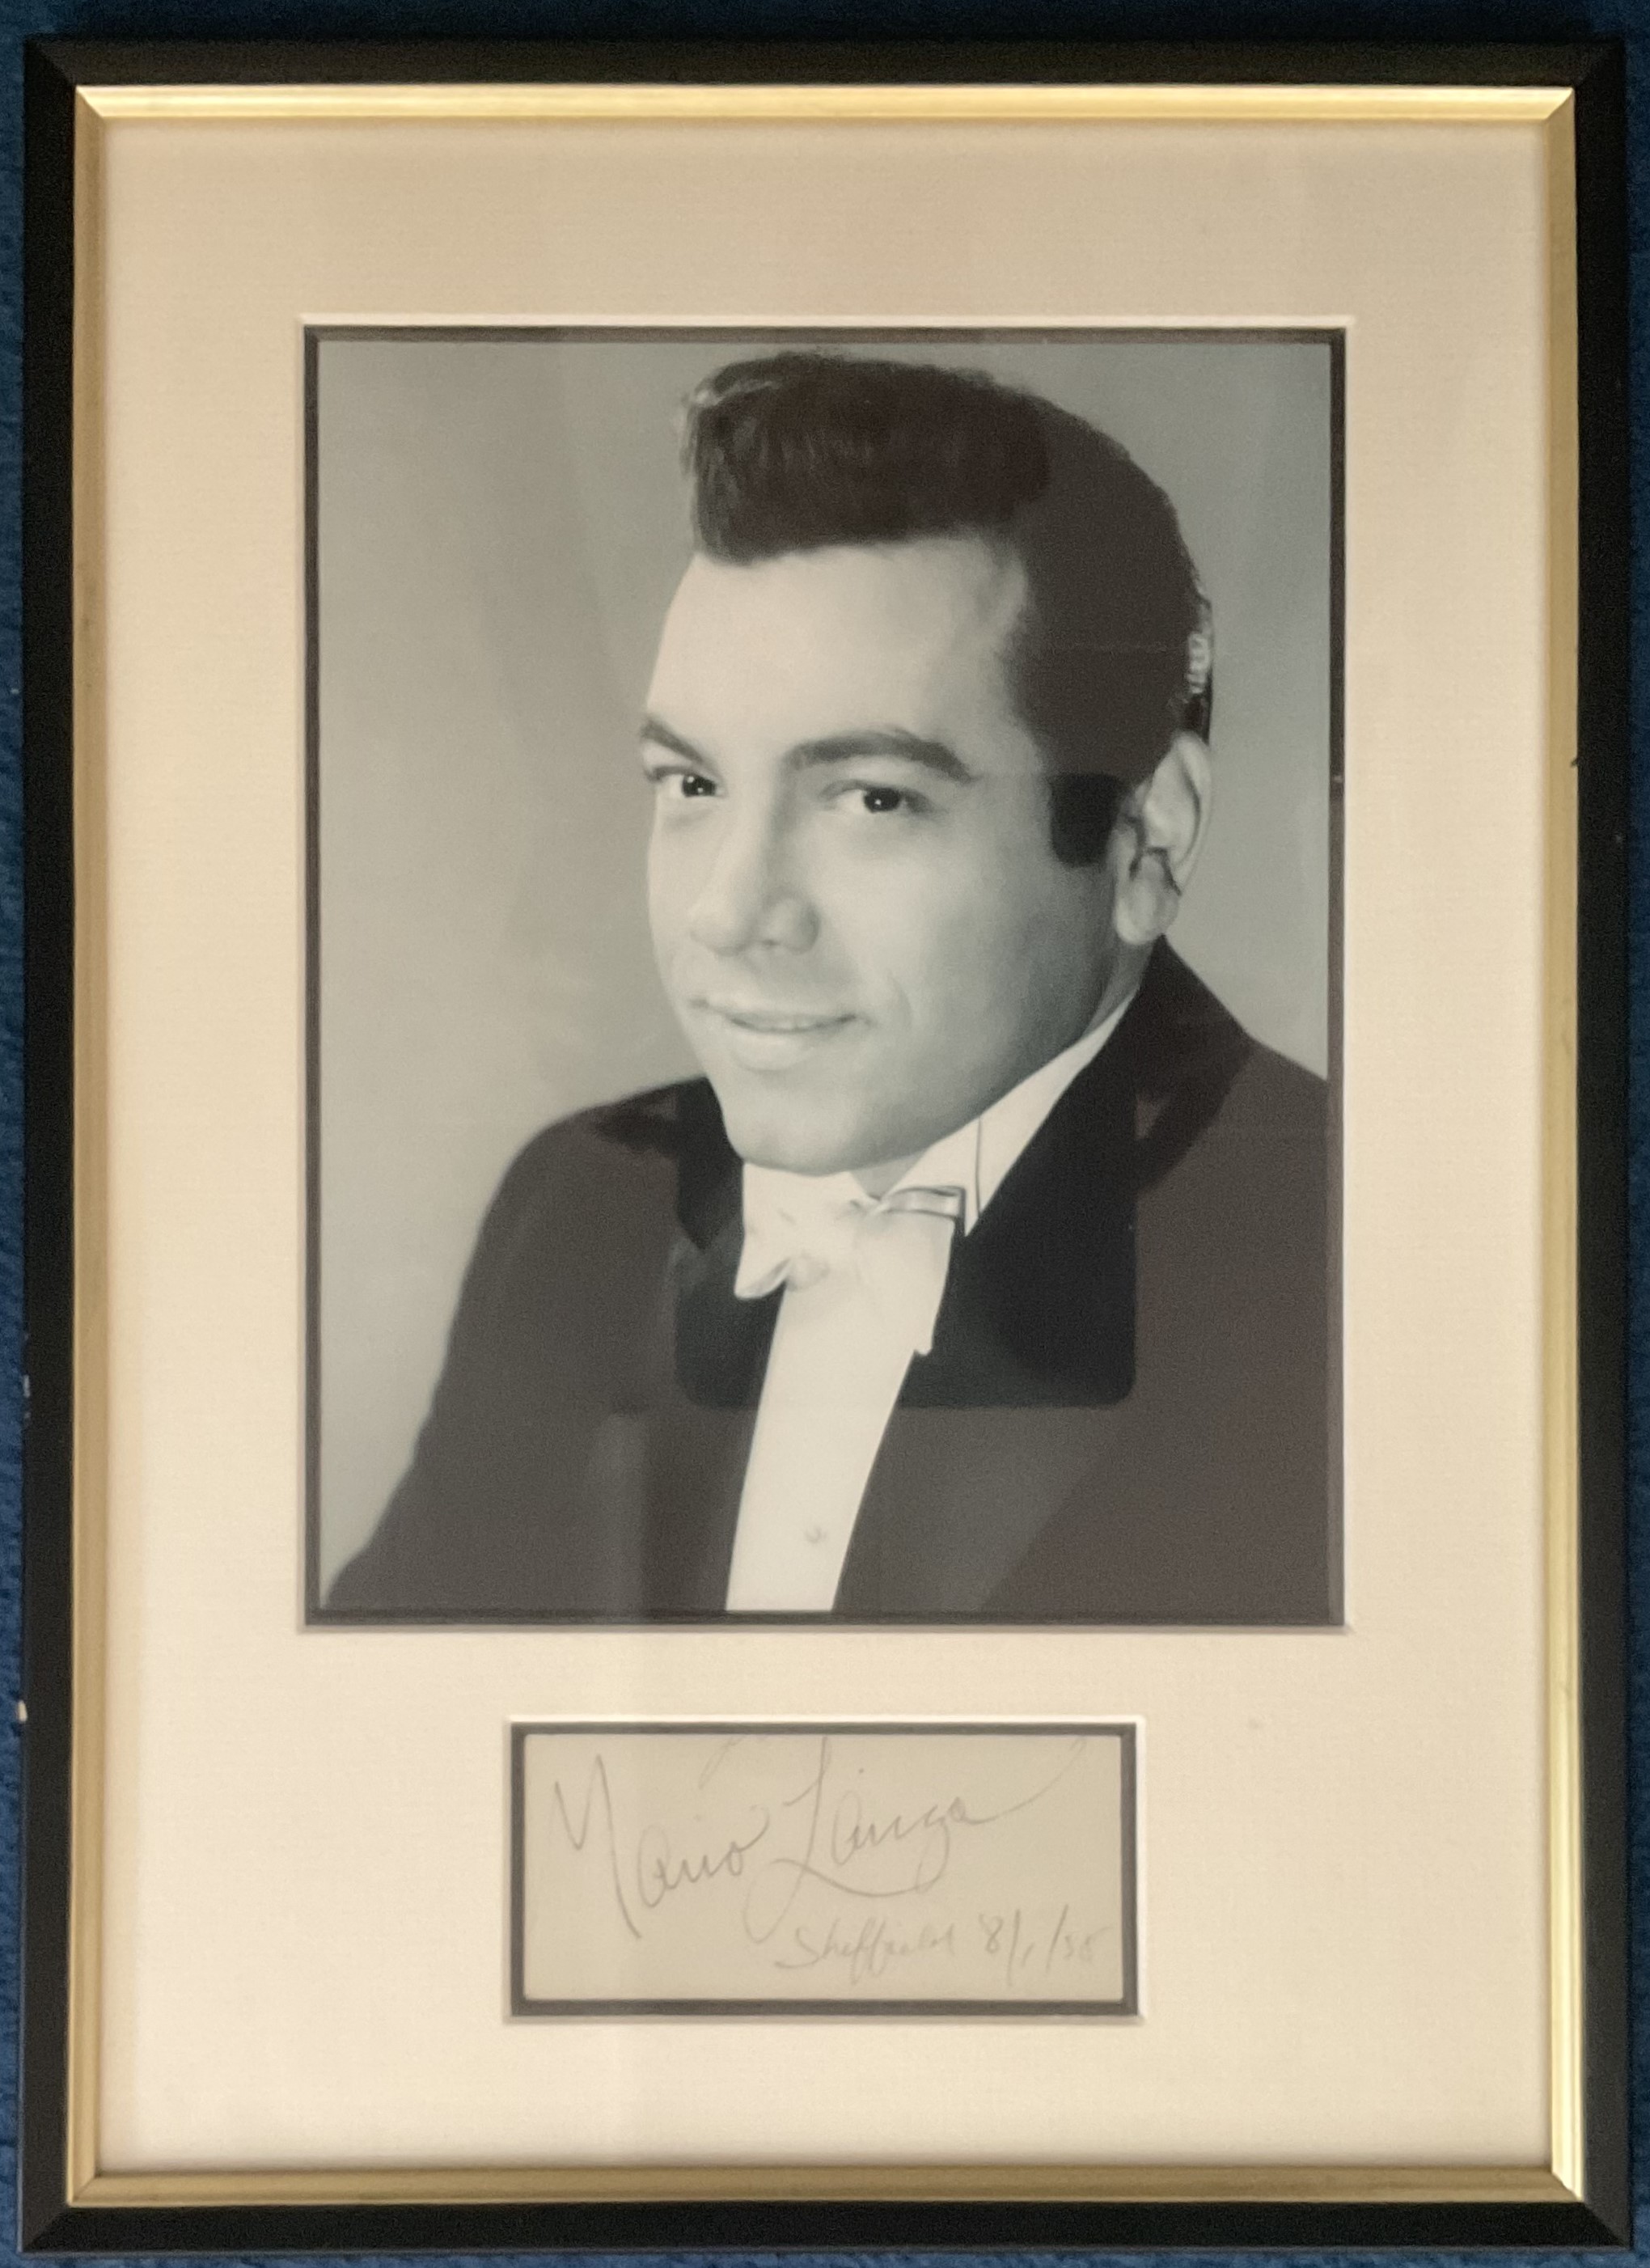 Music Mario Lanza autograph presentation. Large pencil autograph dated 1958 framed and double